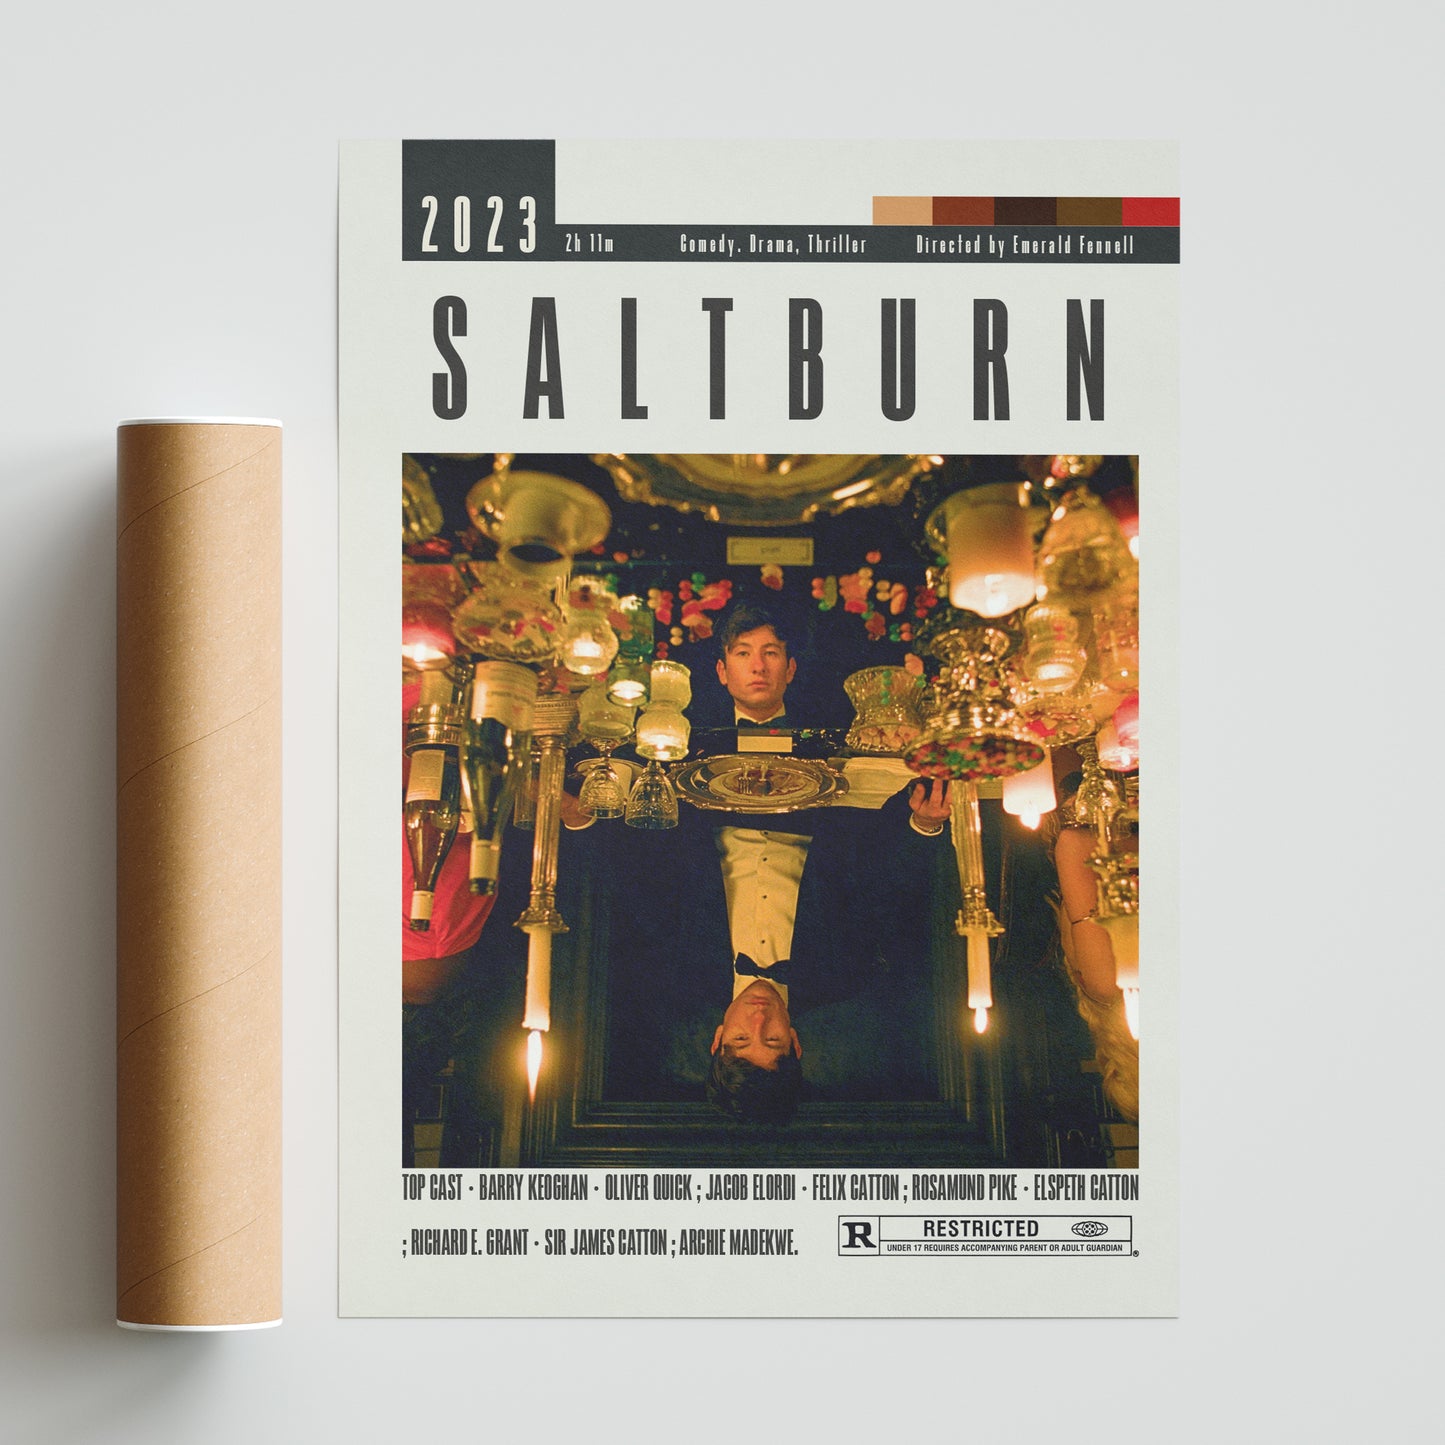 Elevate your home decor with our Saltburn Poster featuring stunning original movie art posters. Available in various sizes, this vintage-inspired wall art print is perfect for any midcentury or retro style. Add a touch of cinema to your space with this custom, minimalist movie poster of the best movies of all time.